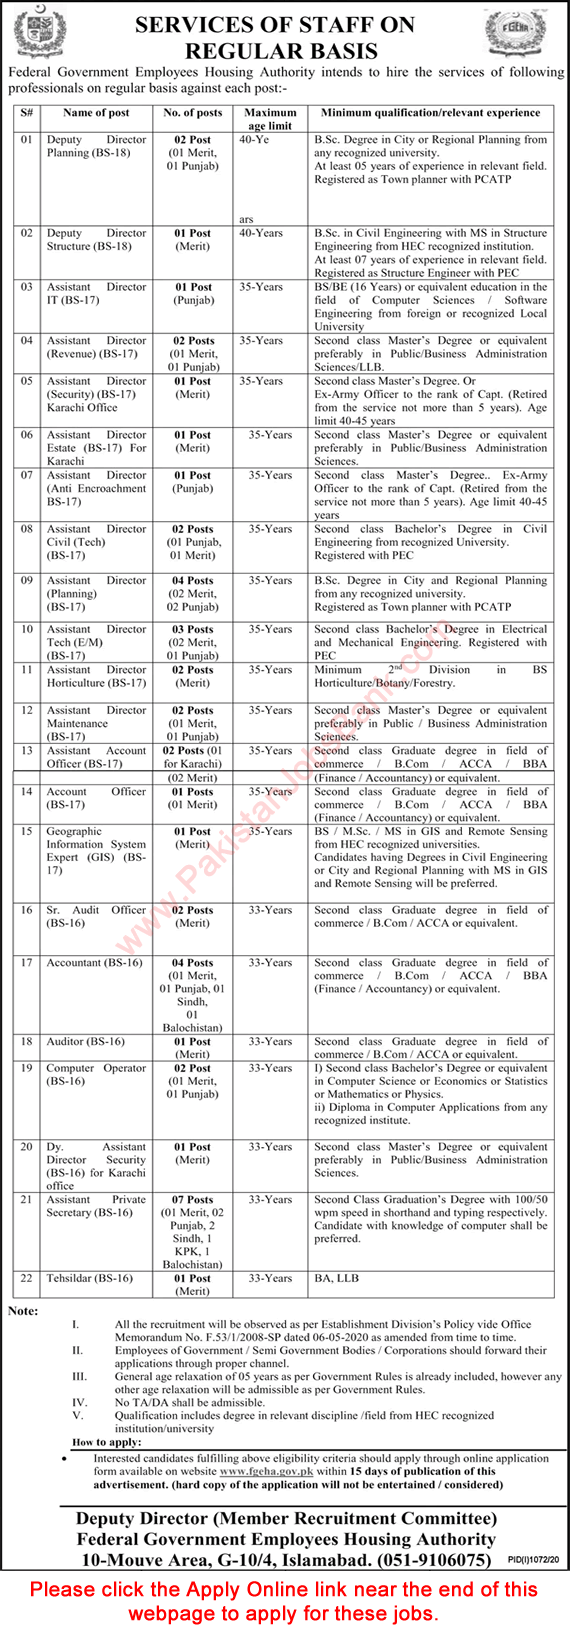 Government of Pakistan – Federal Government Employees Housing Authority is looking to hire following staff